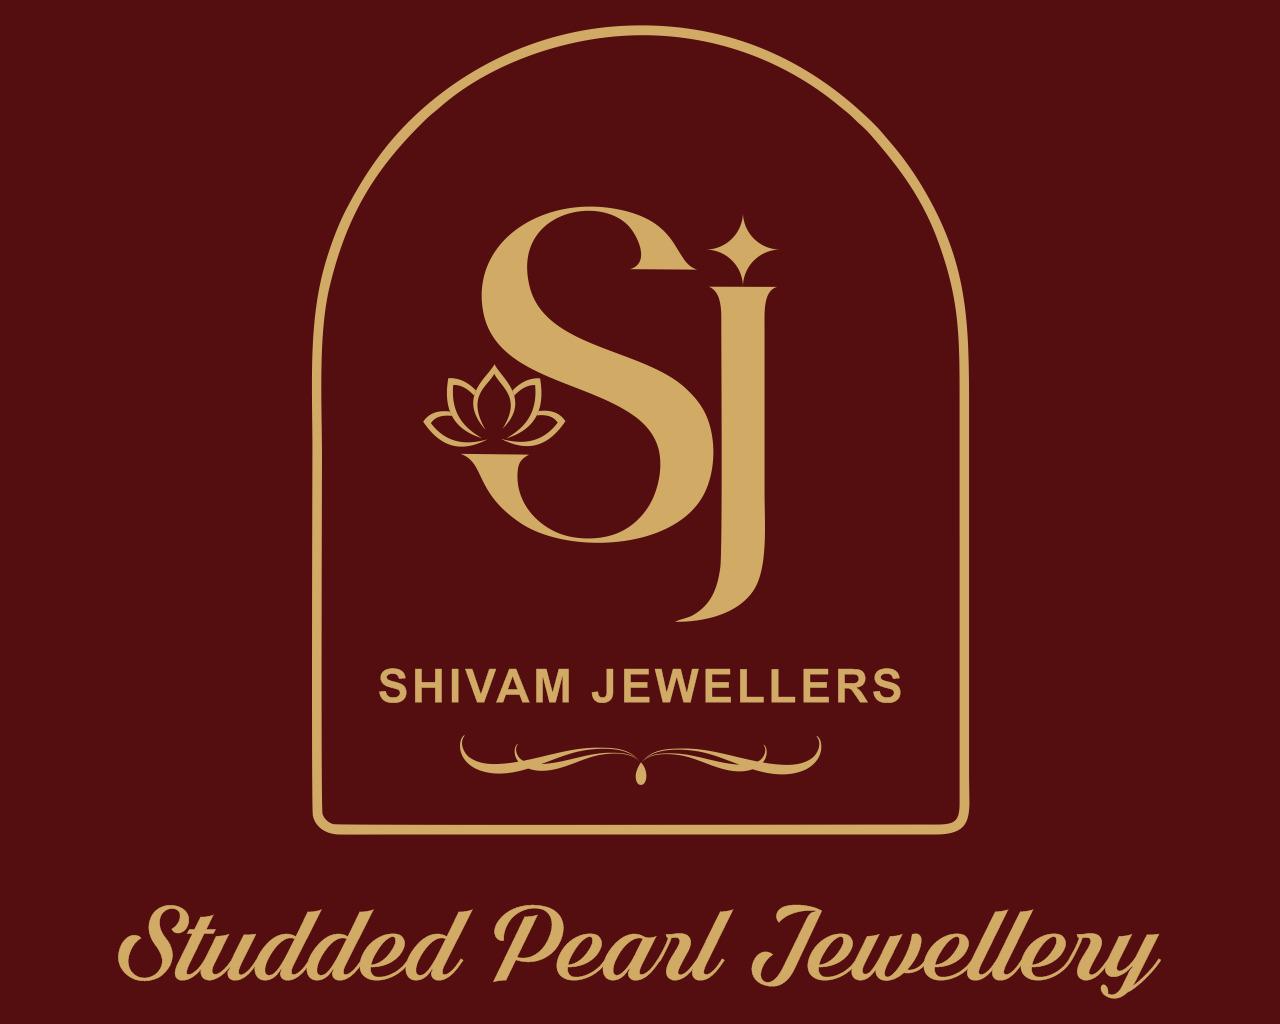 Shakti Jewellers in Chandigarh Sector 23c,Chandigarh - Best Silver Jewellery  Showrooms in Chandigarh - Justdial